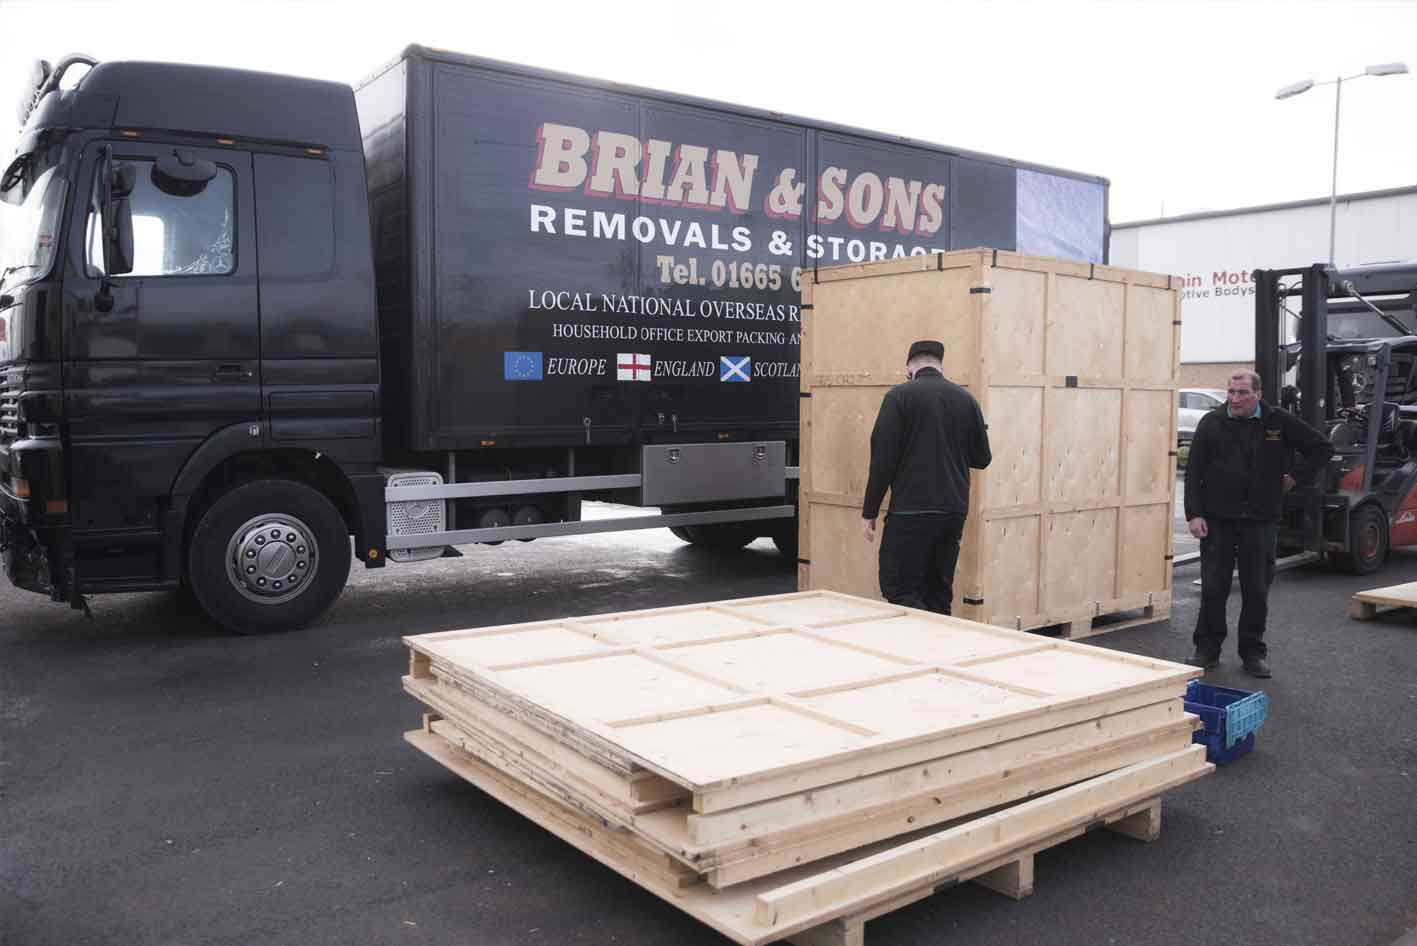 Packing for Removals at Brian and Sons